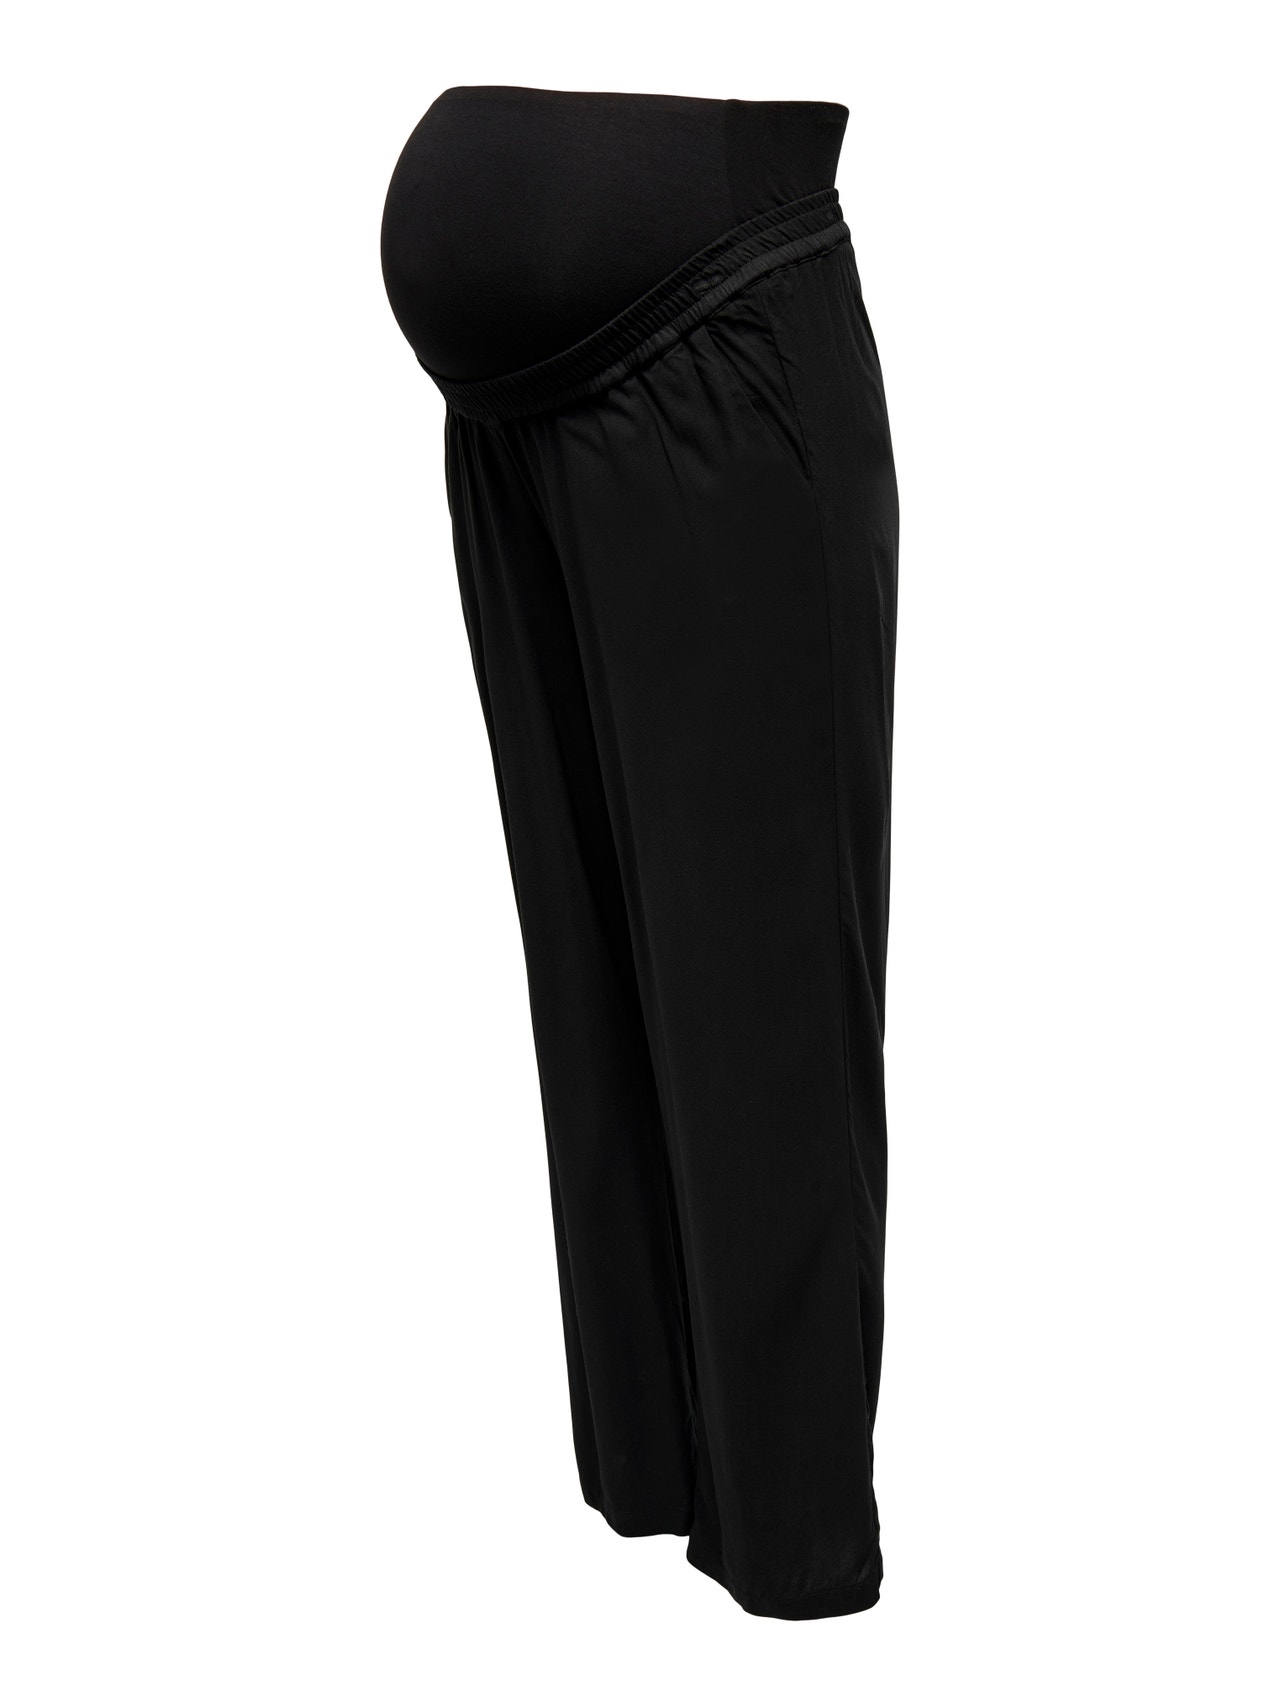 ONLY Normal geschnitten Hohe Taille Hose -Black - 15298890